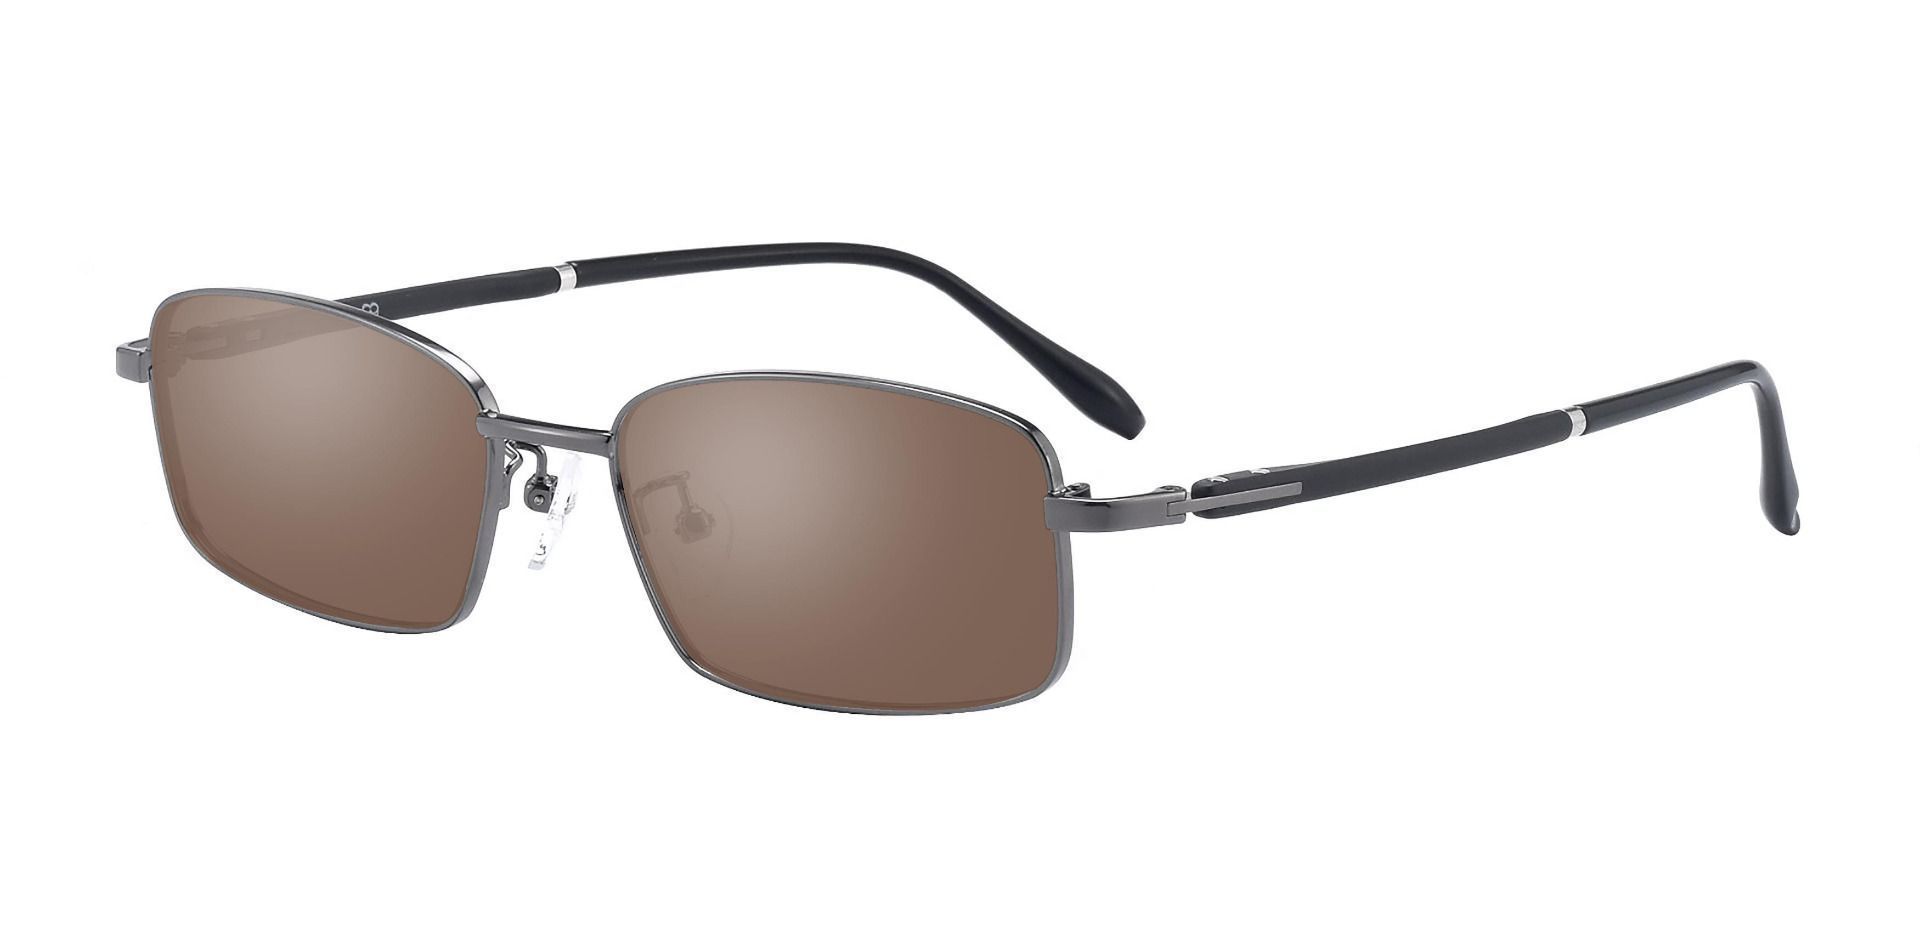 Press Rectangle Lined Bifocal Sunglasses - Gray Frame With Brown Lenses ...